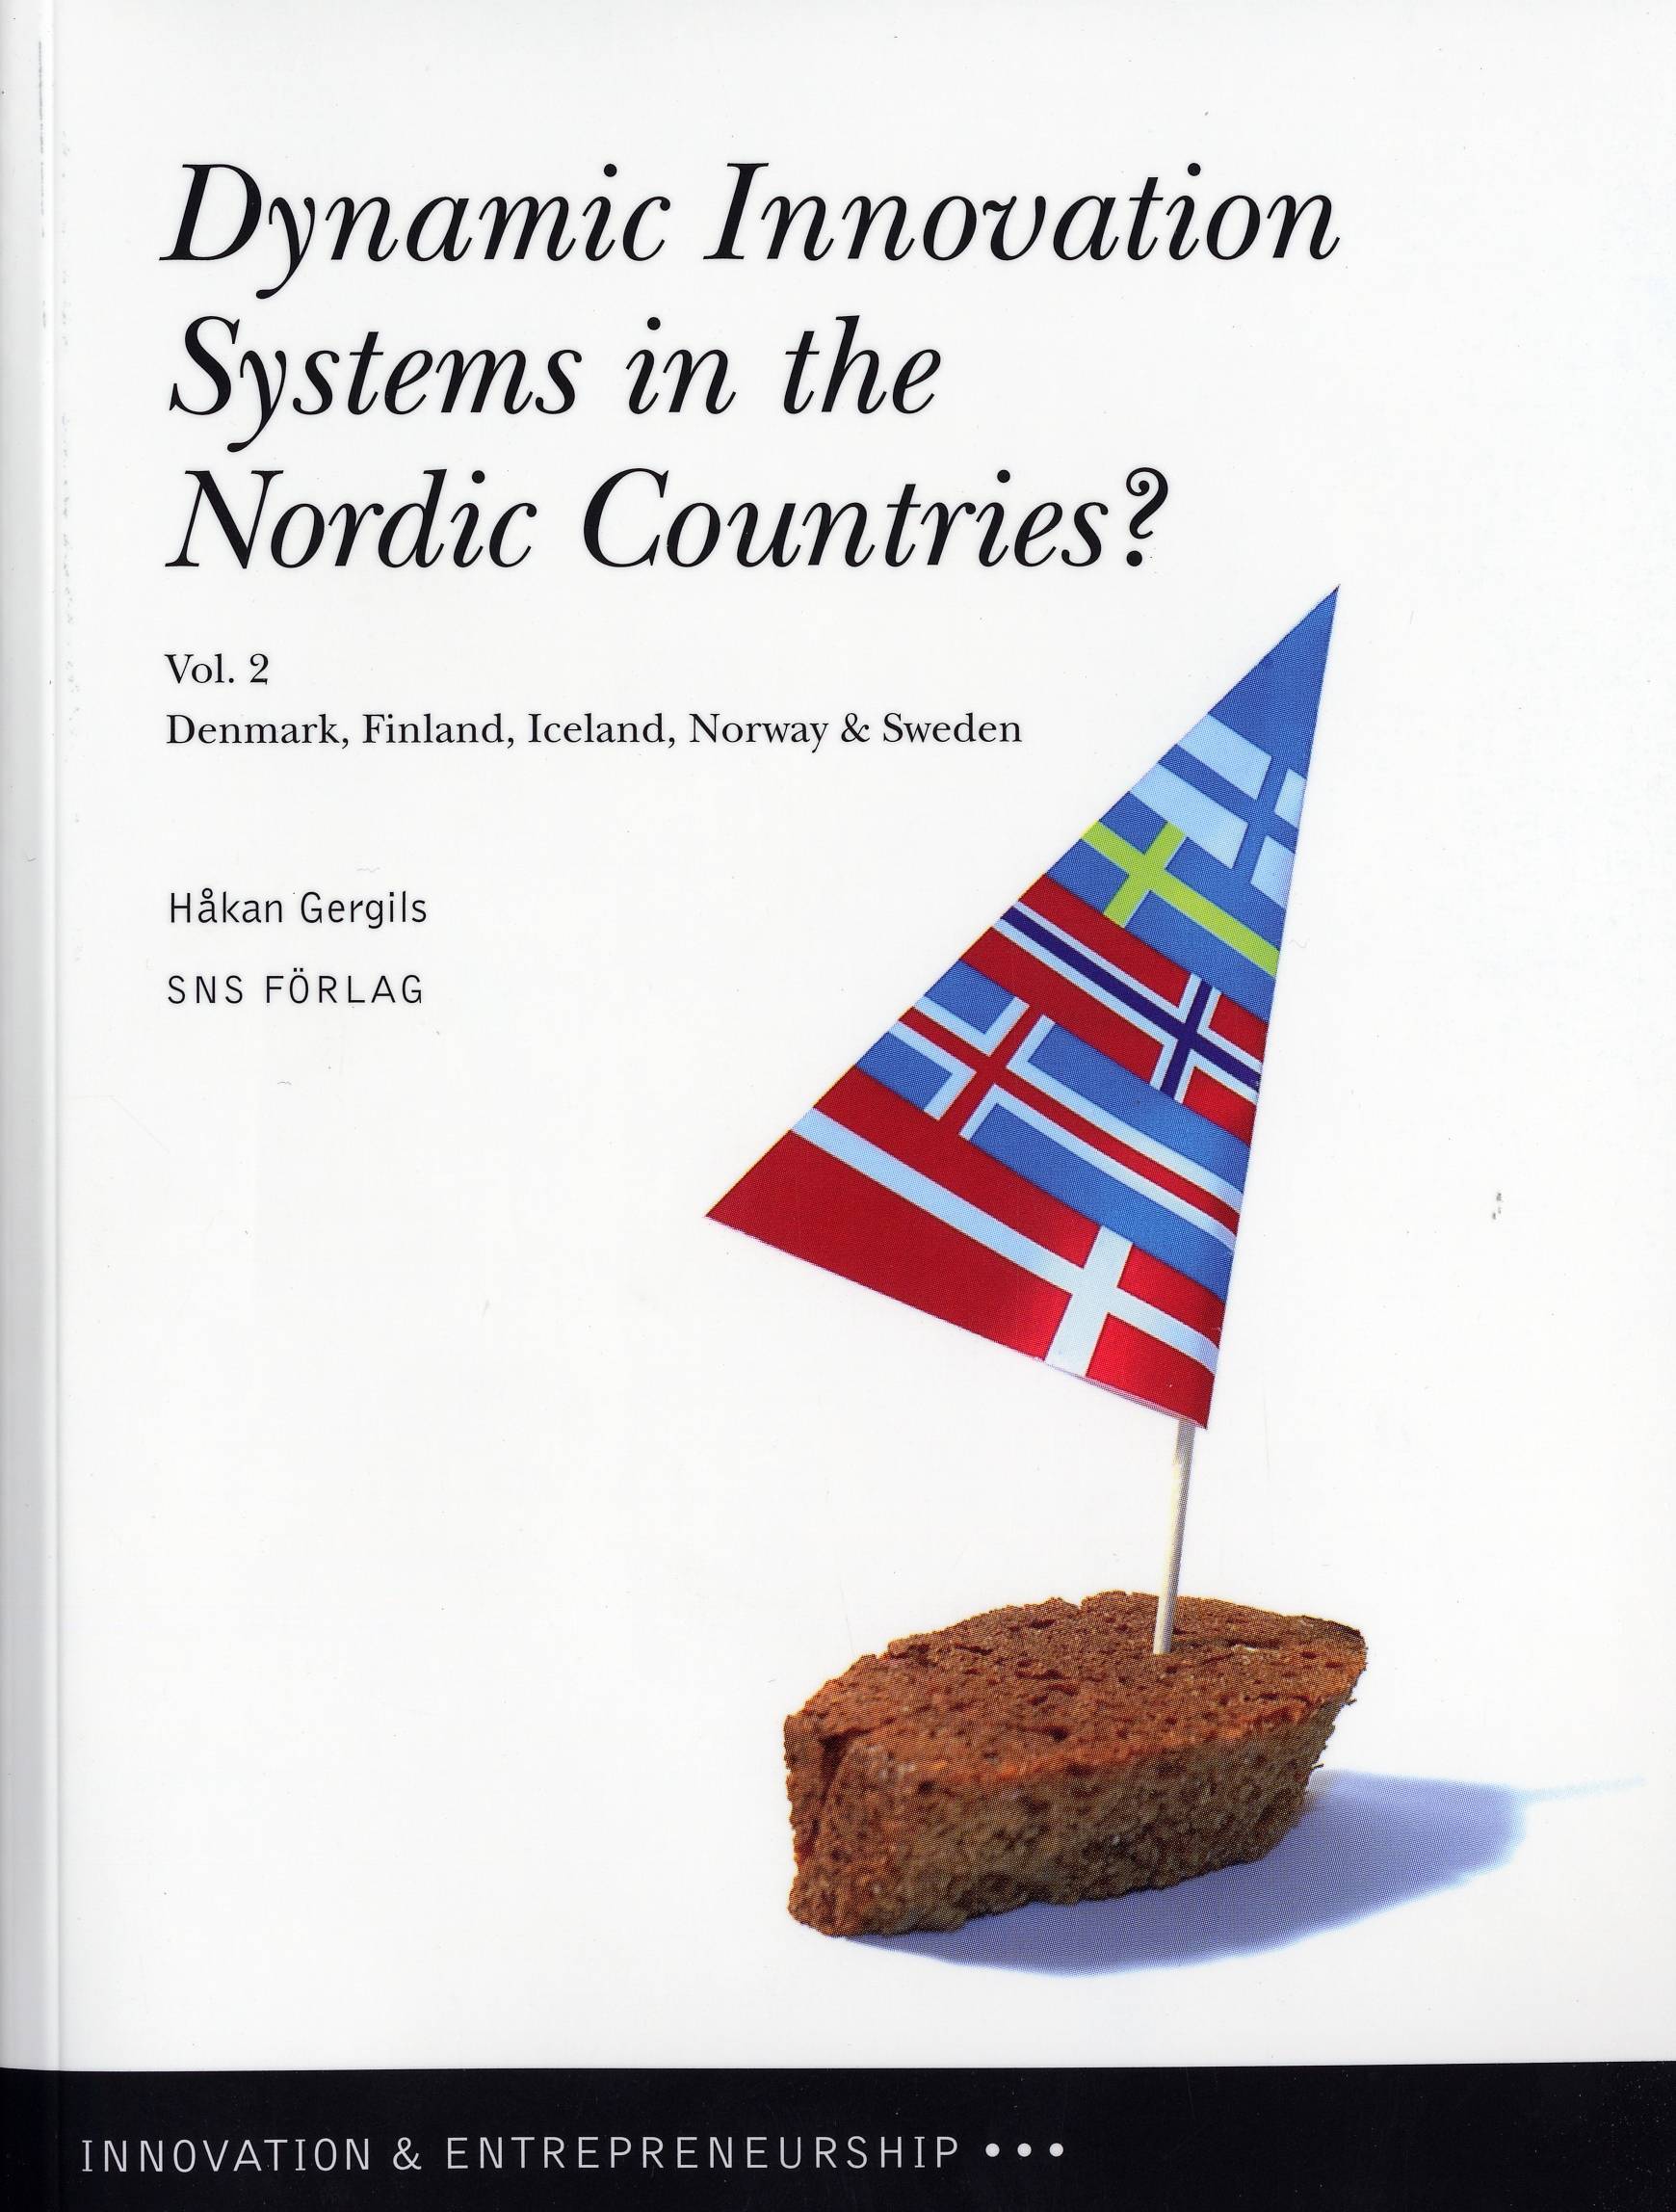 Dynamic innovation systems in the Nordic countries? : Denmark, Finland, Iceland, Norway & Sweden. Vol. 2